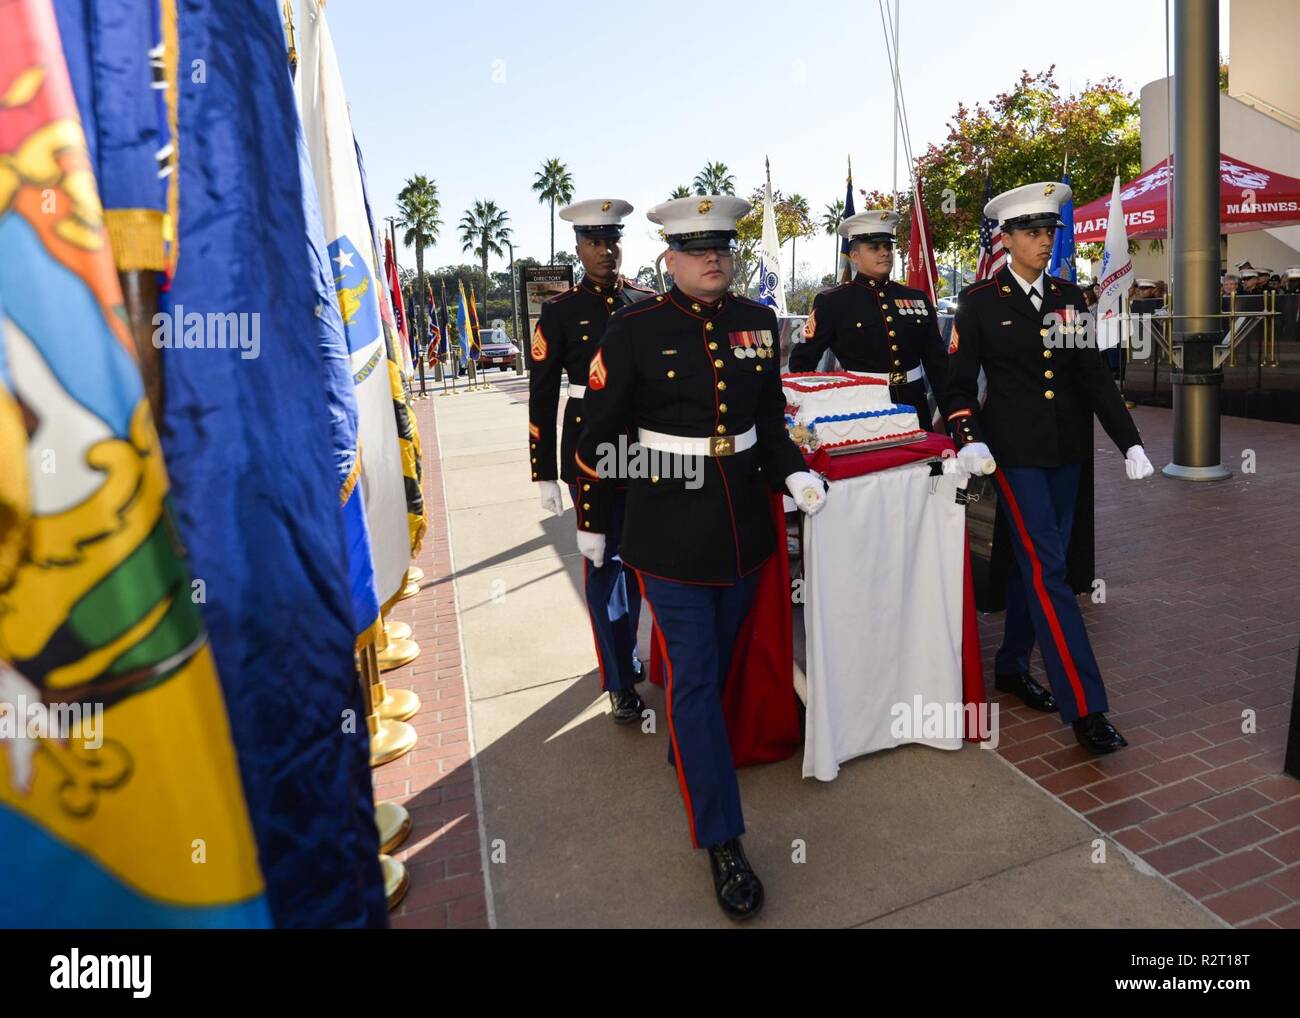 SAN DIEIGO (Nov. 09,2018) — Marines from the Wounded Warrior Battalion at Naval Medical Center San Diego (NMCSD) march the cake out of the courtyard  at the celebration of the 243rd Marine Corps Birthday.  NMCSD is the largest naval hospital on the west coast, employing more than 6,000 Sailors, Marines, civilians and contractors. Stock Photo